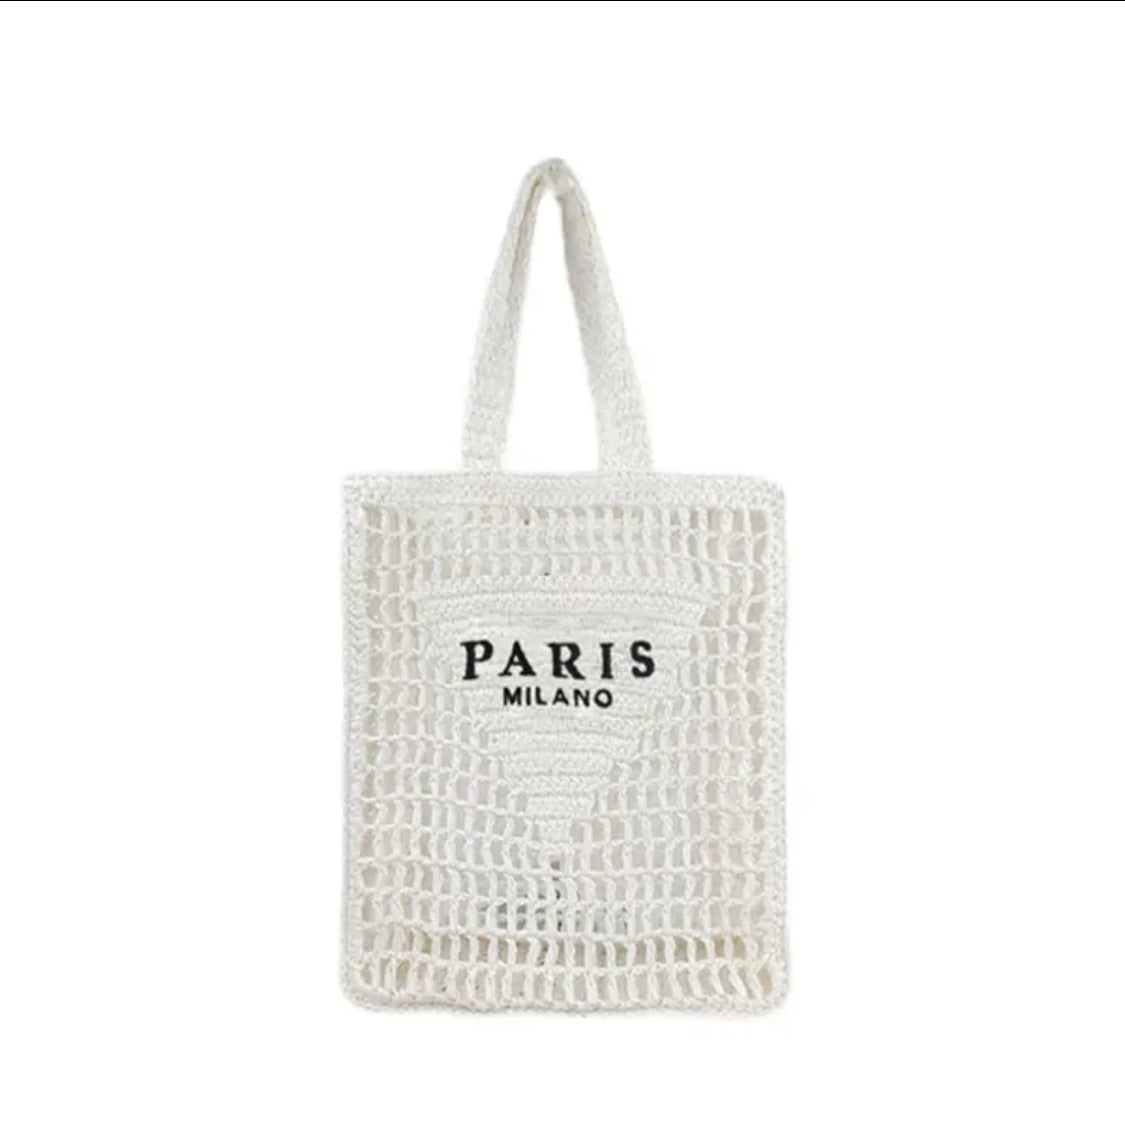 Raffia Straw Hollow Out Square Tote Bag